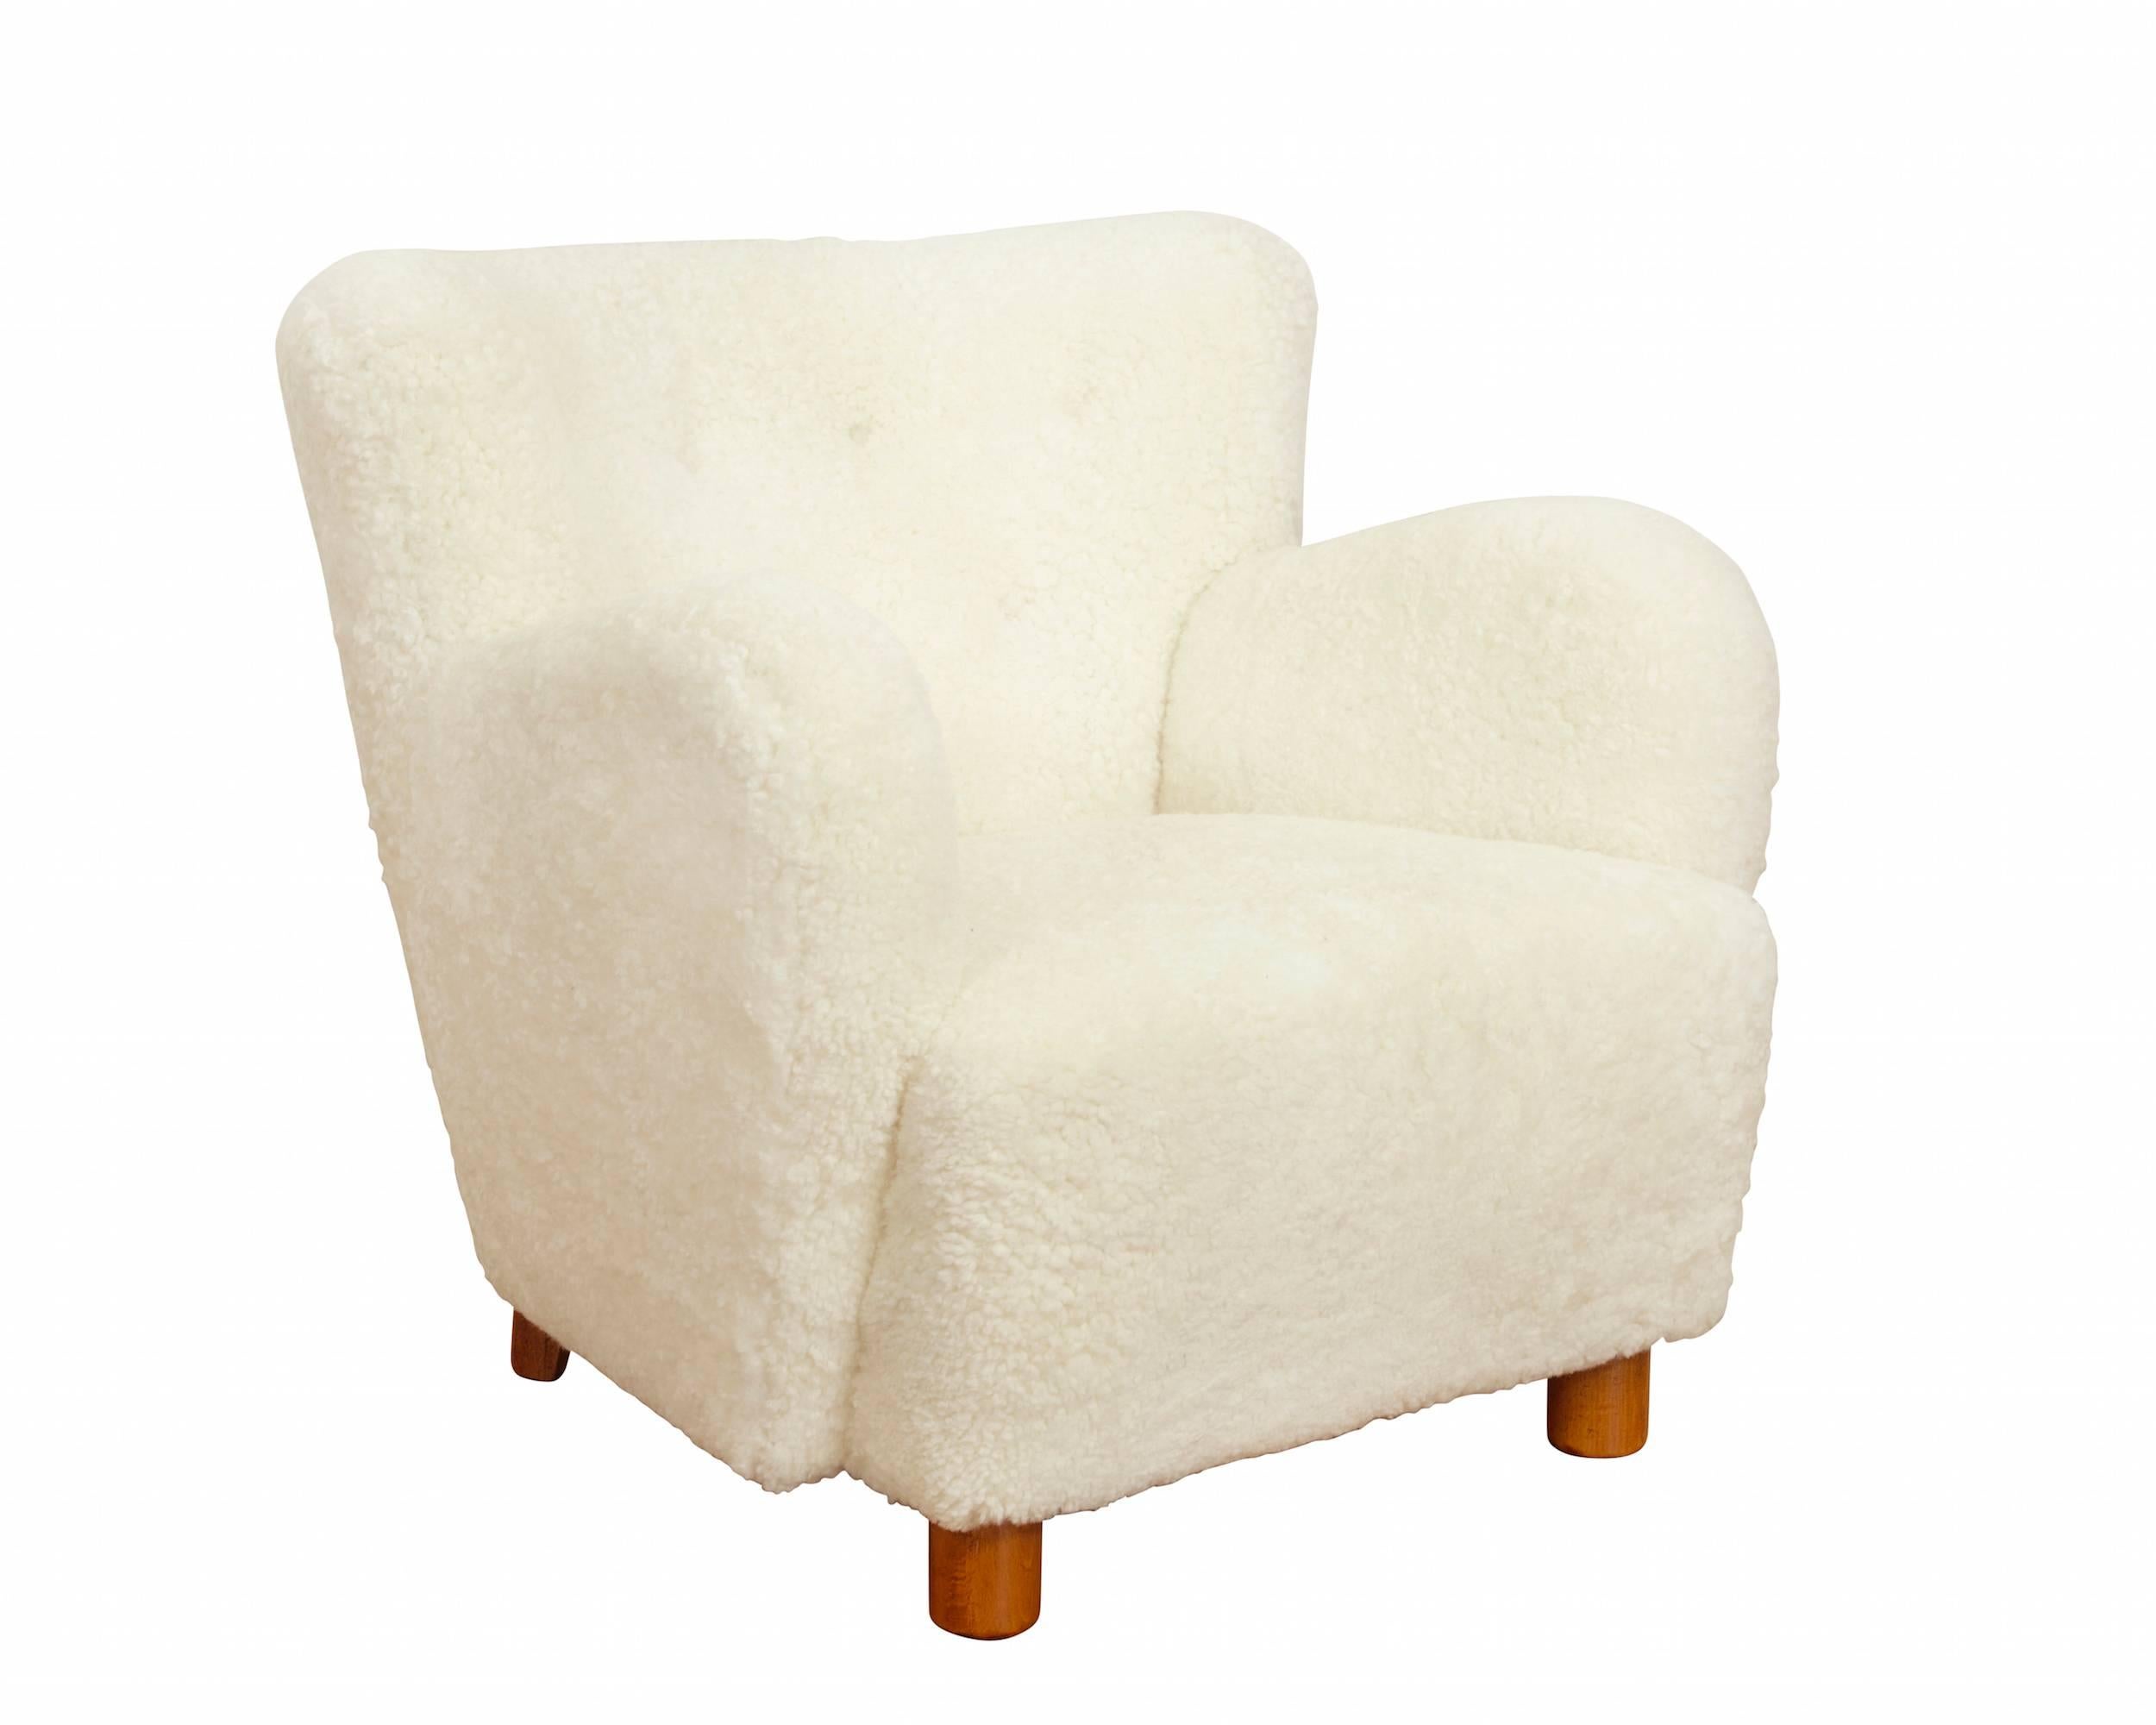 A pair of lounge chairs upholstered in ivory sheepskin, raised on legs of browned beech.